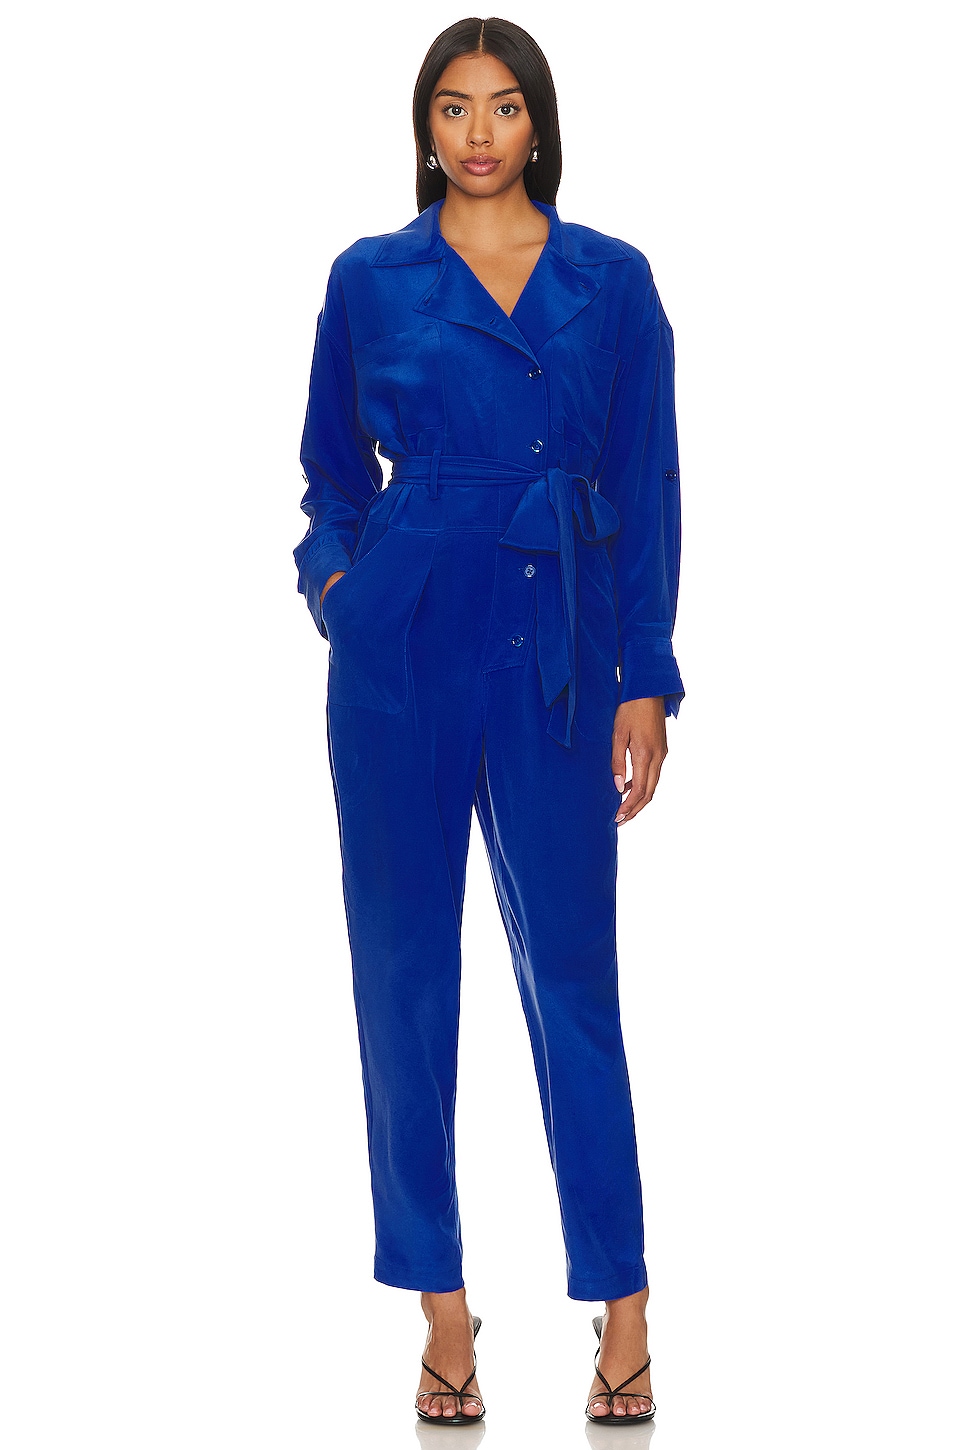 Jumpsuit Polo Ralph Lauren Blue Size US In Not Specified, 48% OFF